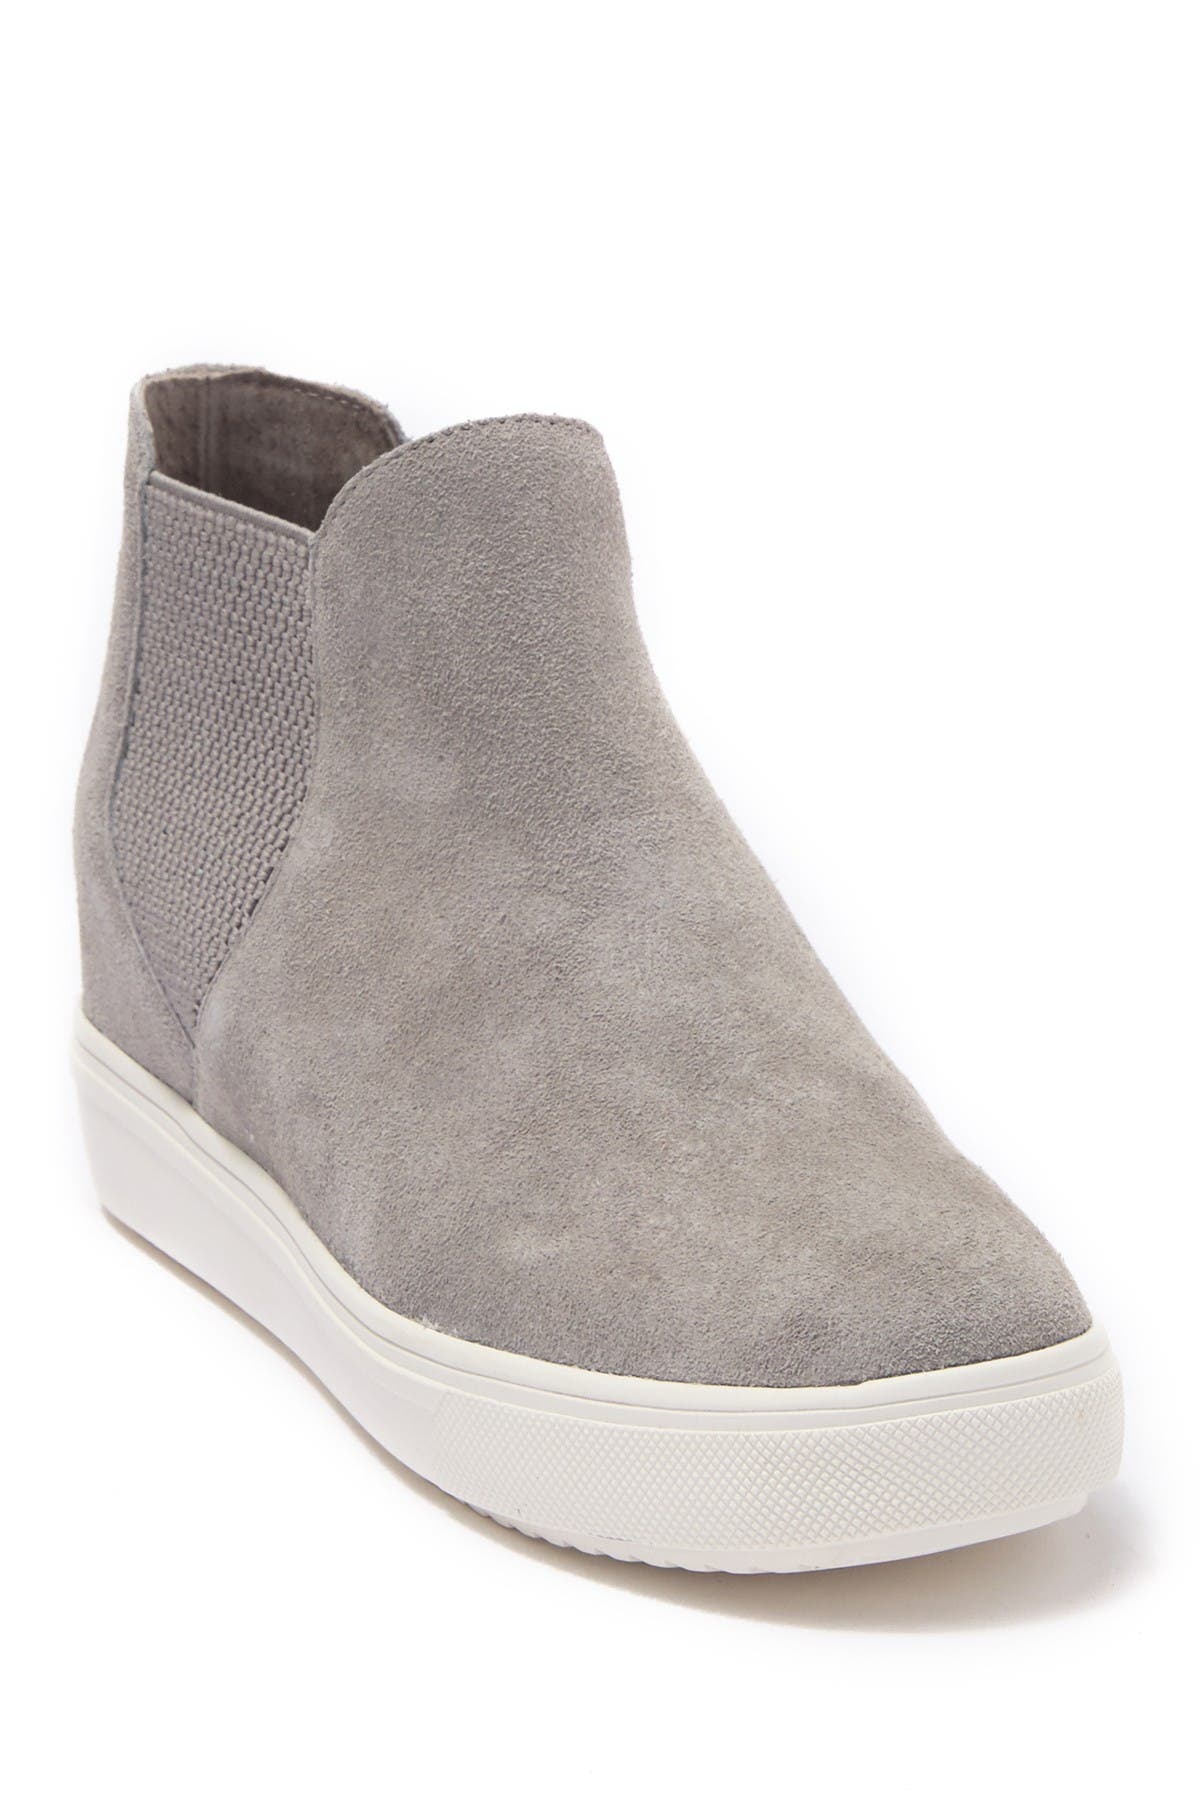 steve madden taupe wedge sneakers